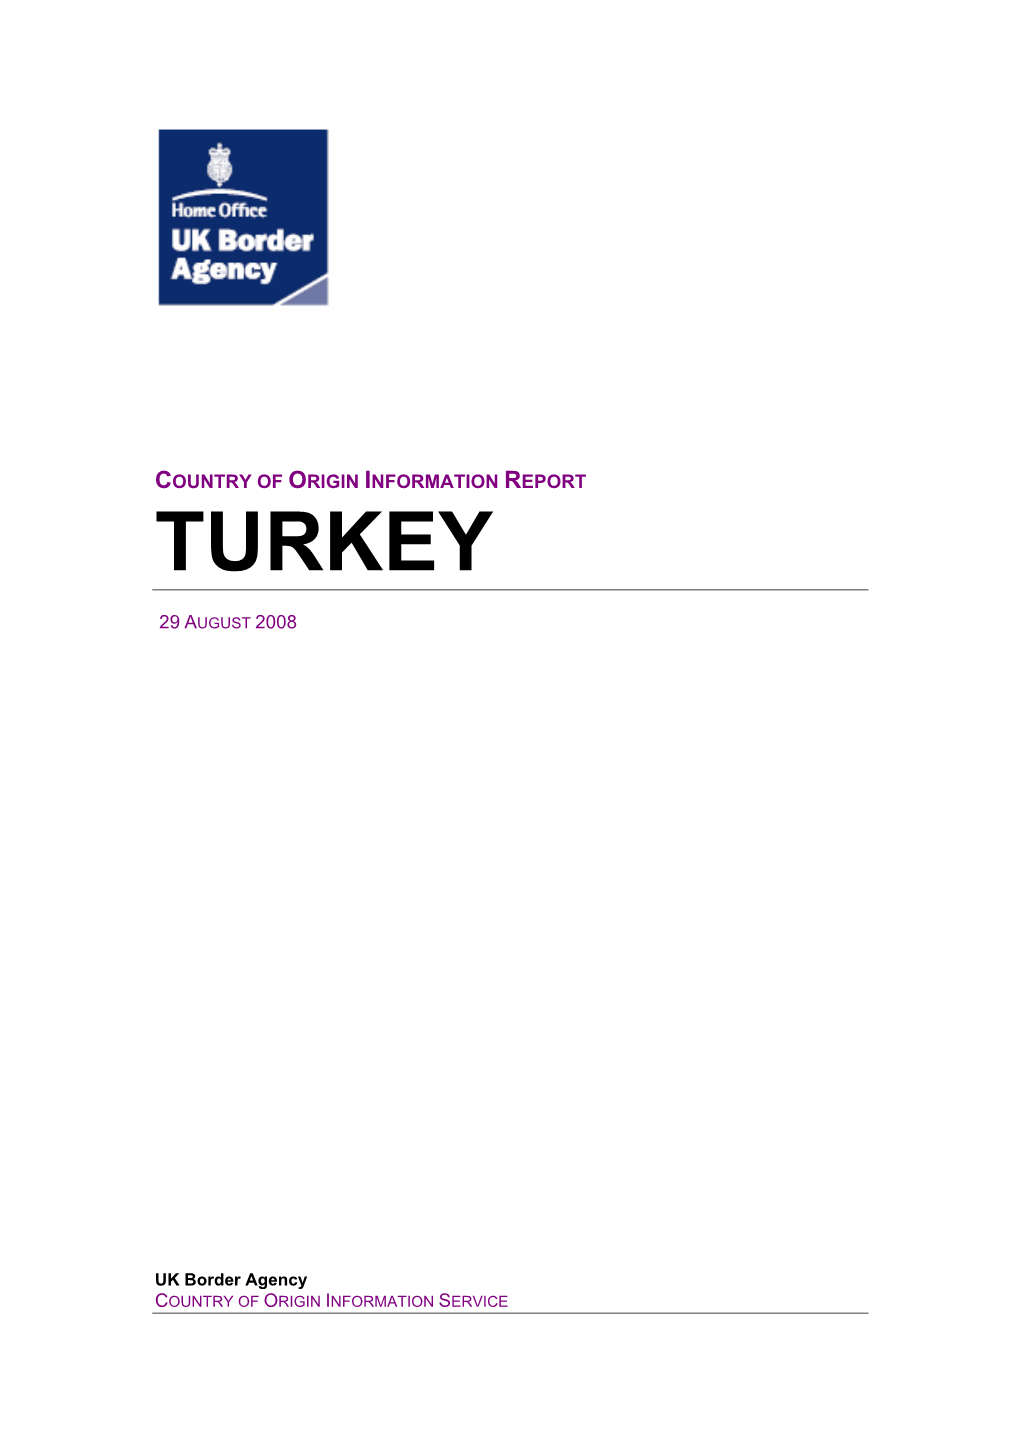 Country of Origin Information Report Turkey August 2008